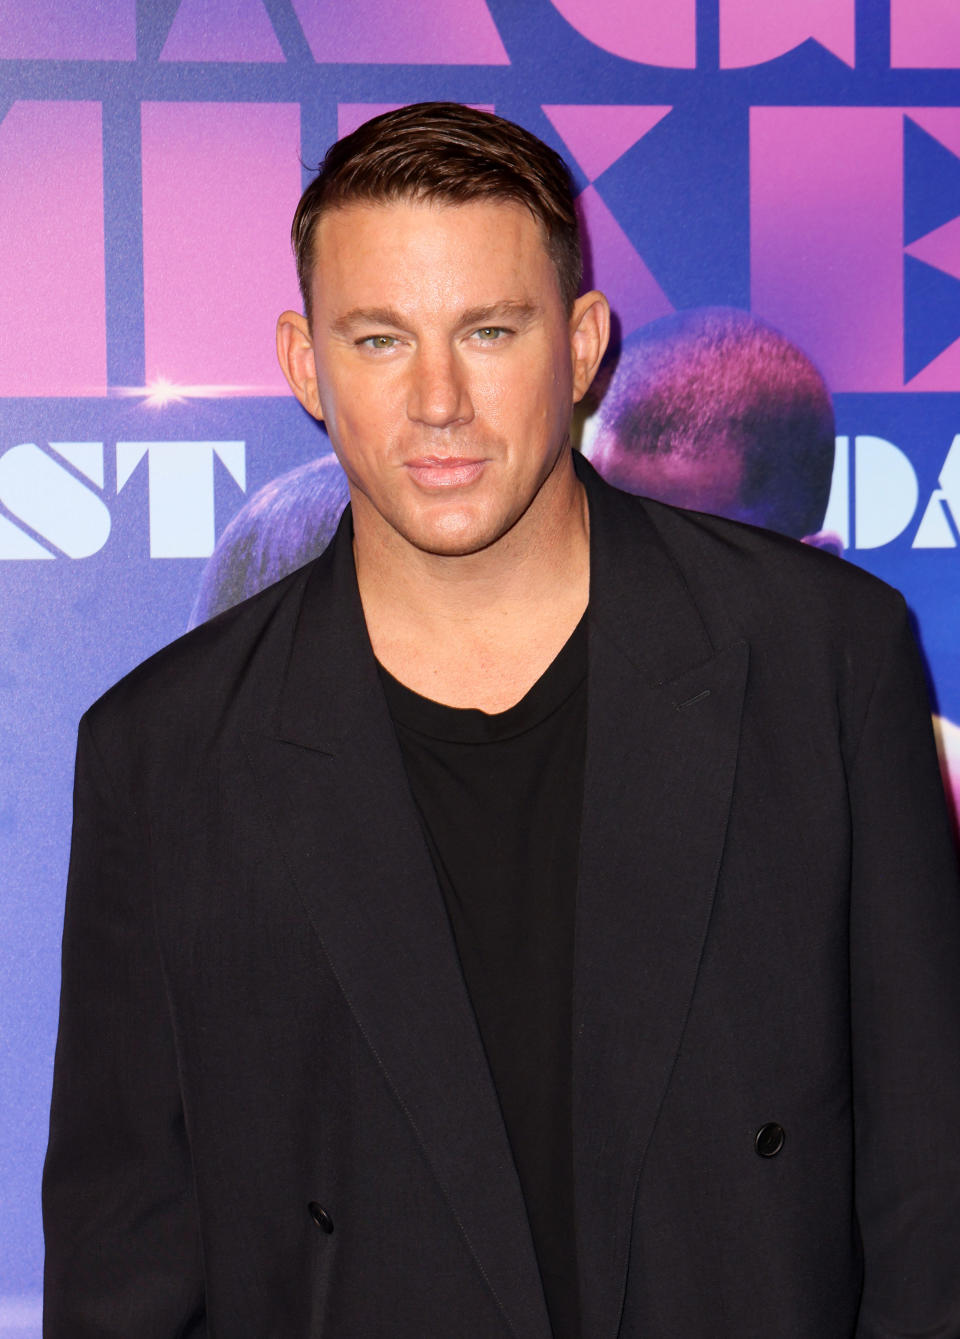 Channing Tatum attends the "Magic Mike's Last Dance" World Premiere on January 25, 2023